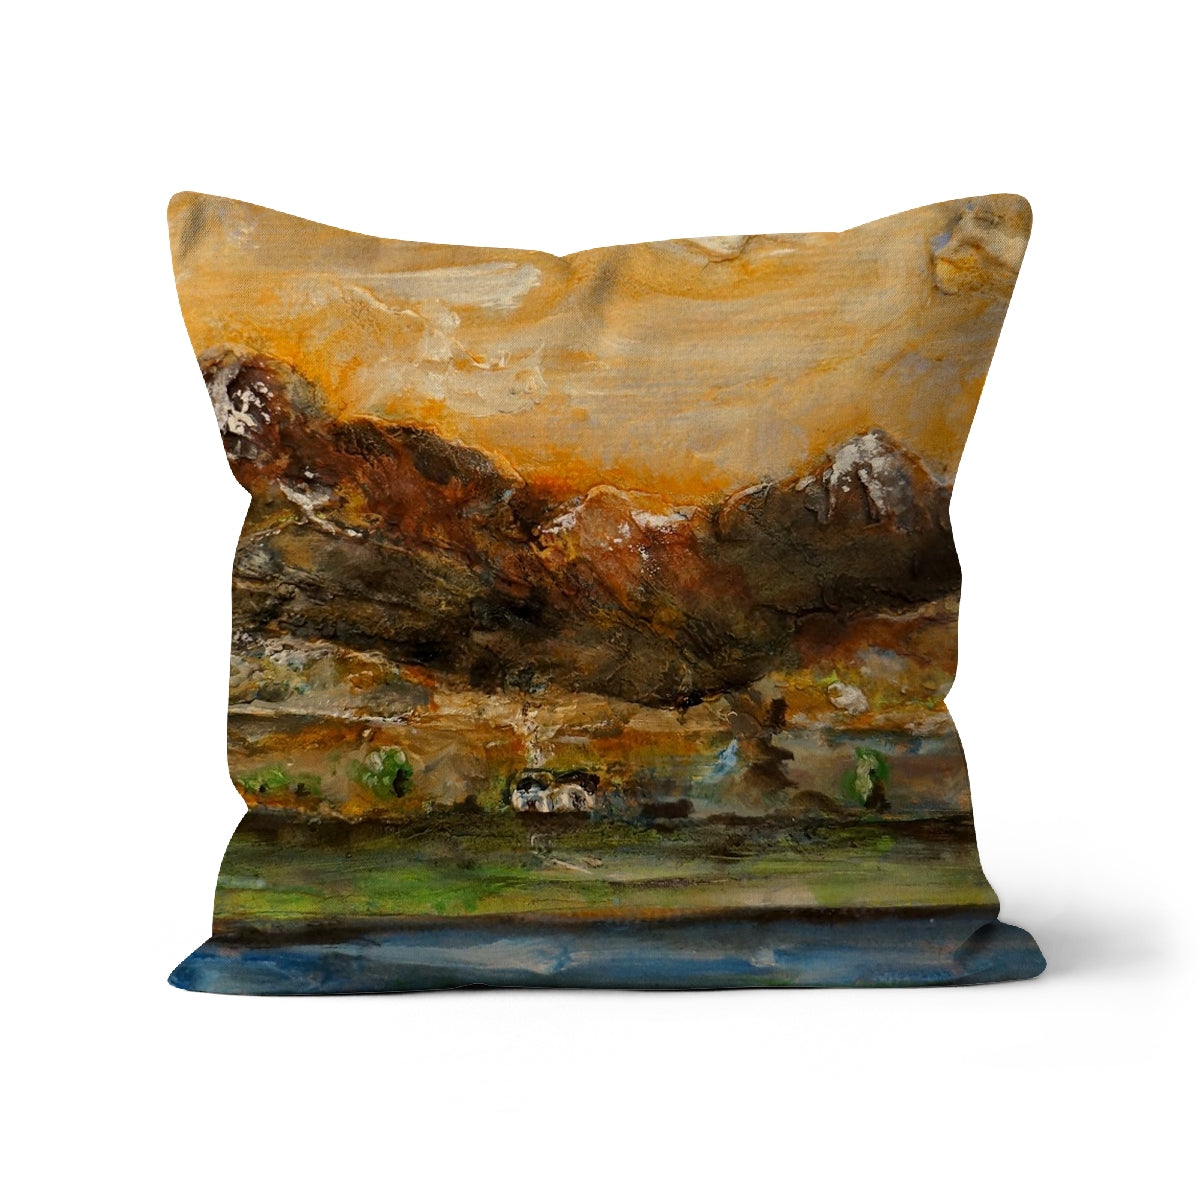 A Glencoe Cottage Art Gifts Cushion-Cushions-Glencoe Art Gallery-Canvas-16"x16"-Paintings, Prints, Homeware, Art Gifts From Scotland By Scottish Artist Kevin Hunter